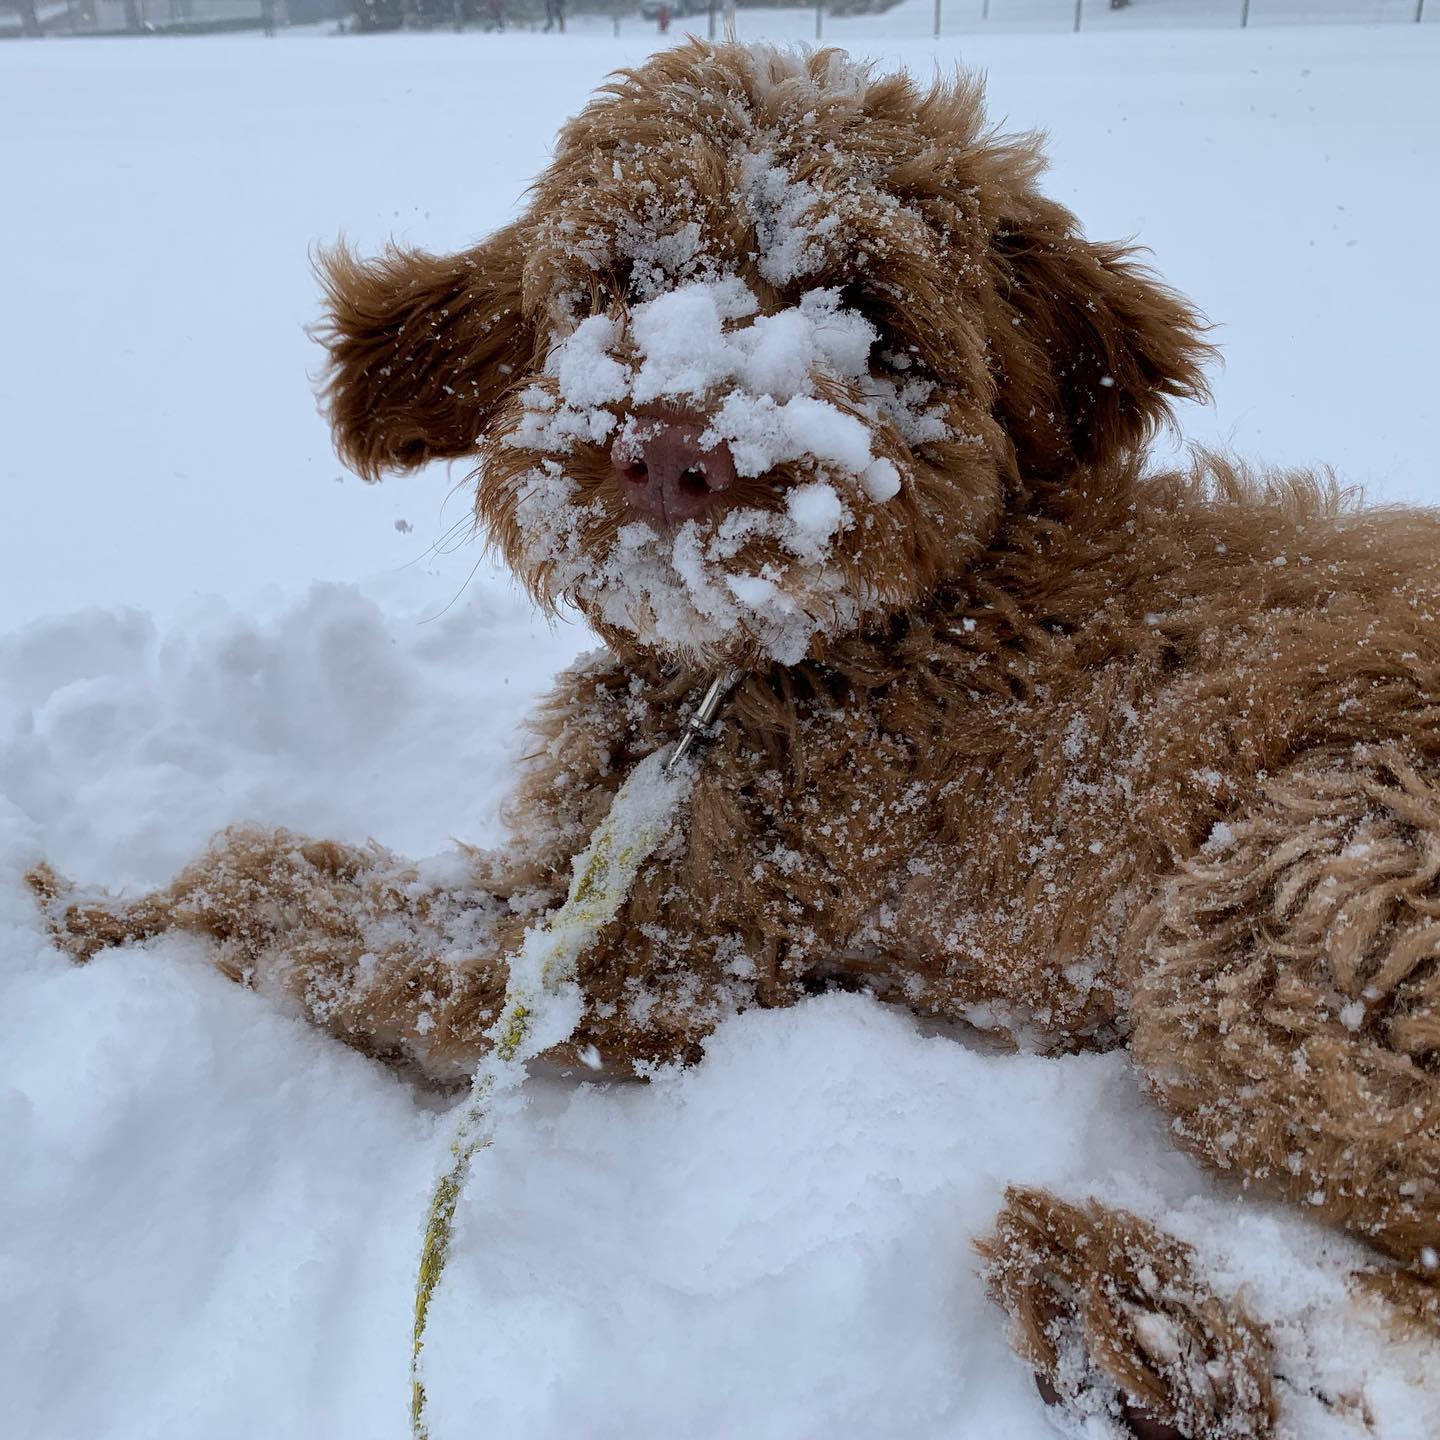 Watching a pup play on the snow is very fun and cute. The cleanup afterwards is not as fun.